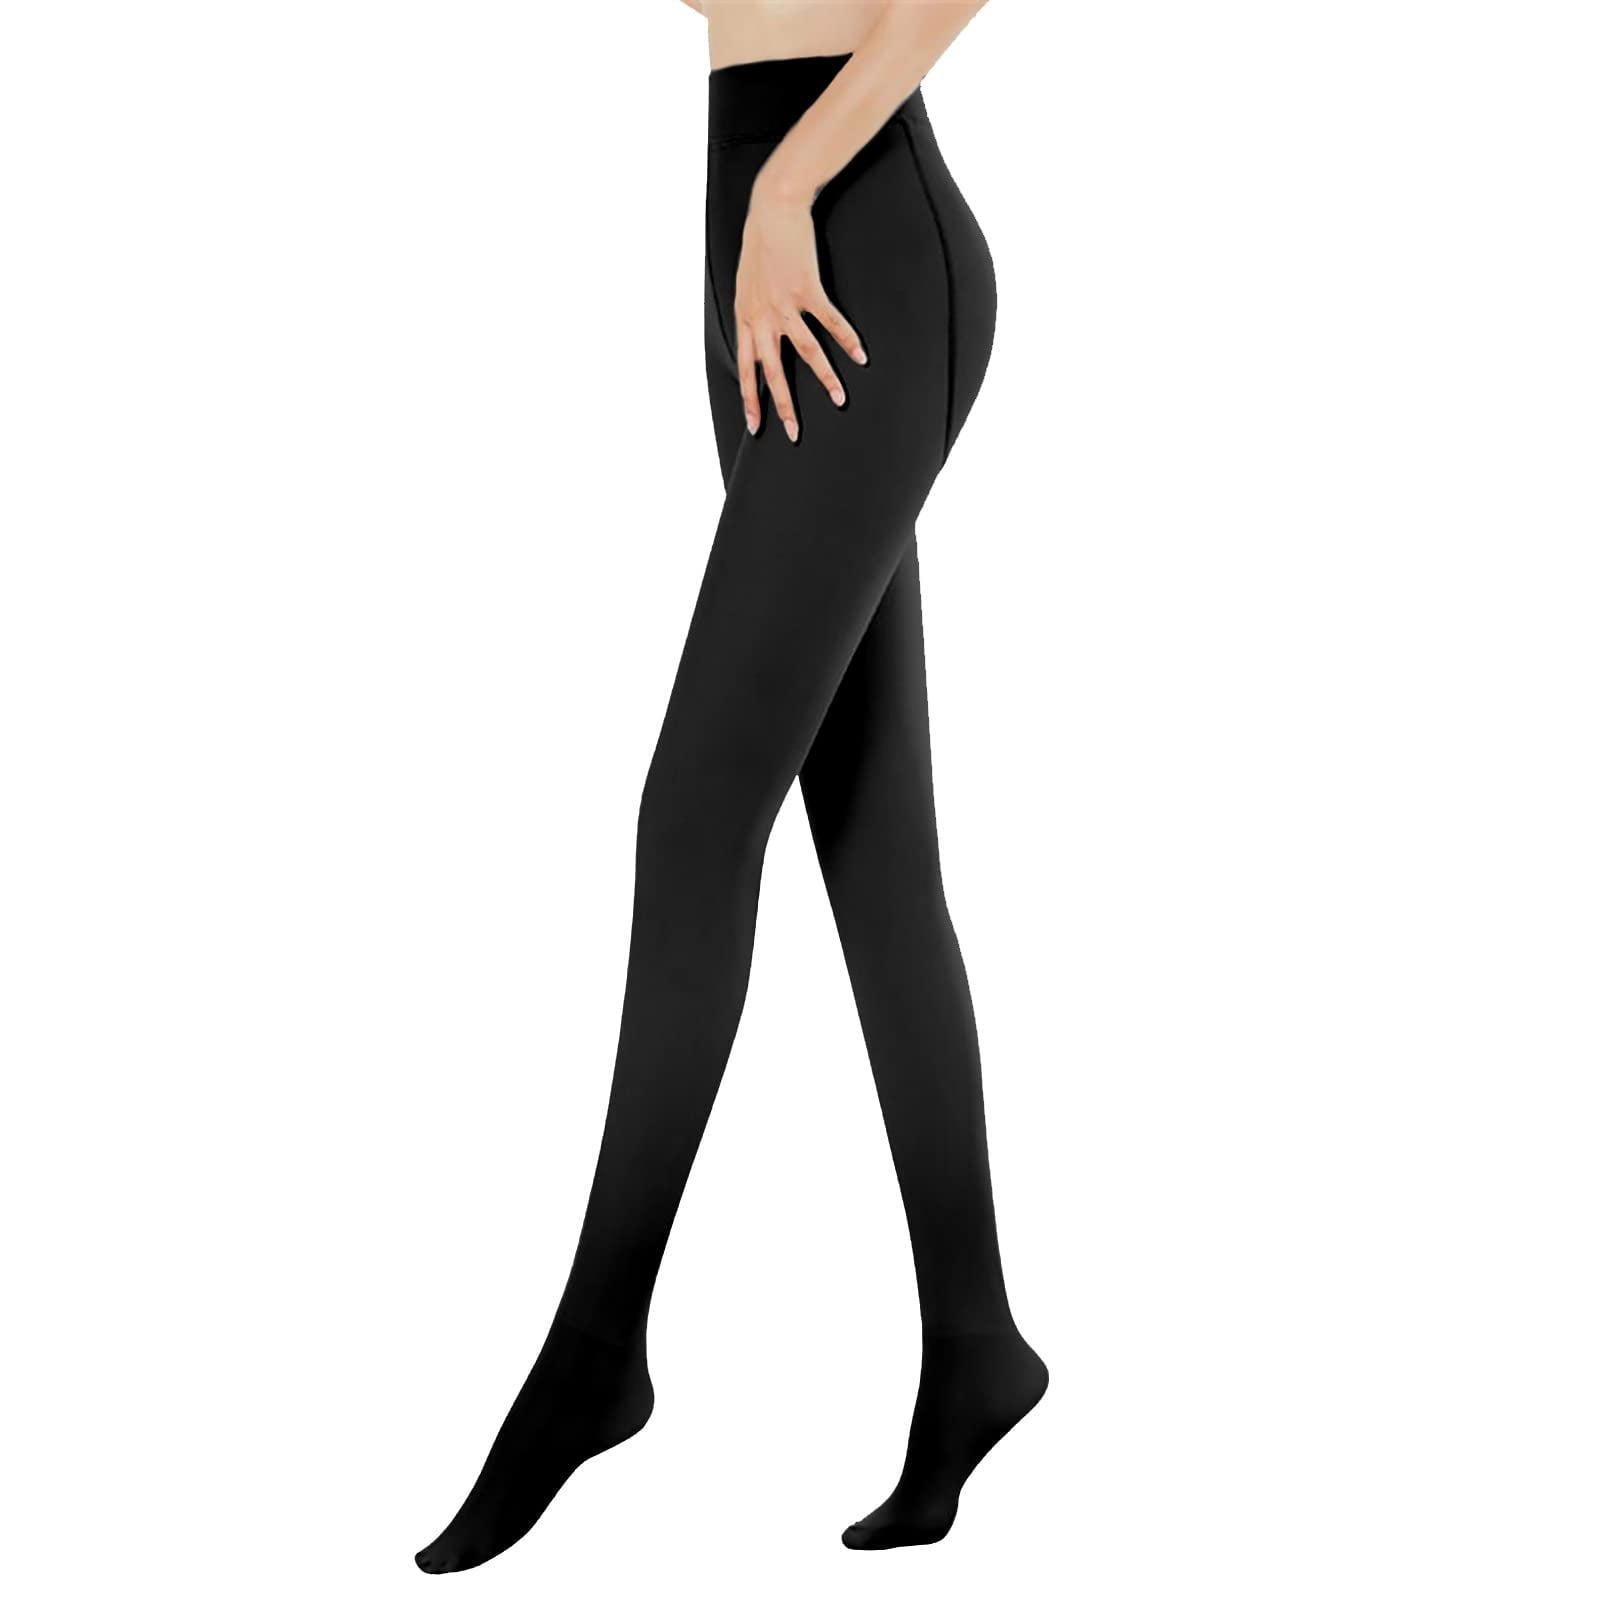 FuraHa Fleece Lined Tights Women Fake Transparent Thermal Pantyhose Leggings  High Waisted Winter Warm Sheer Black Thick Tights 220g at  Women's  Clothing store